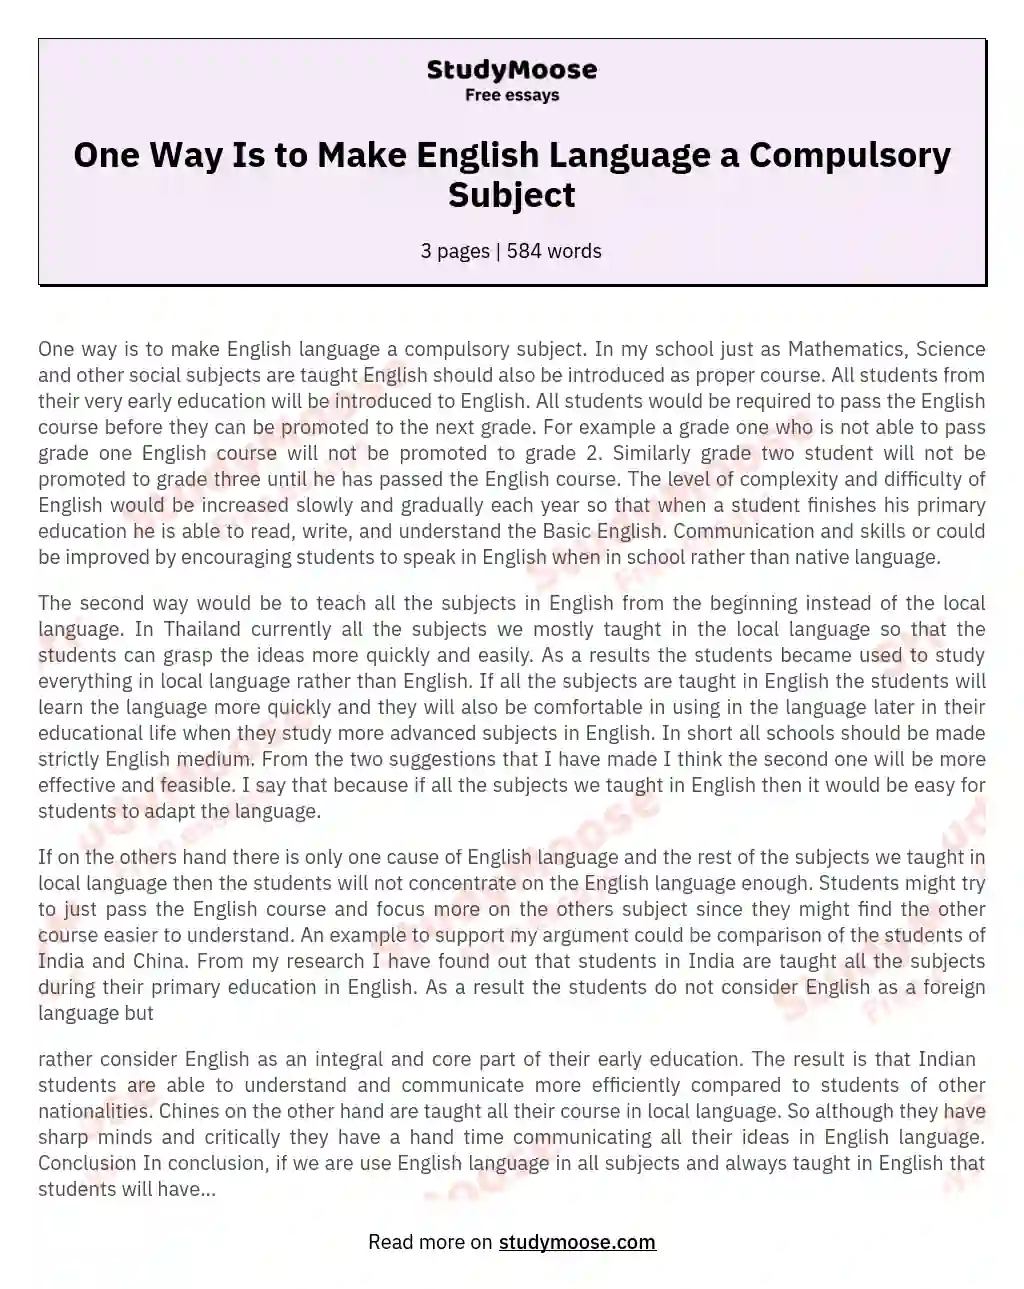 One Way Is to Make English Language a Compulsory Subject essay